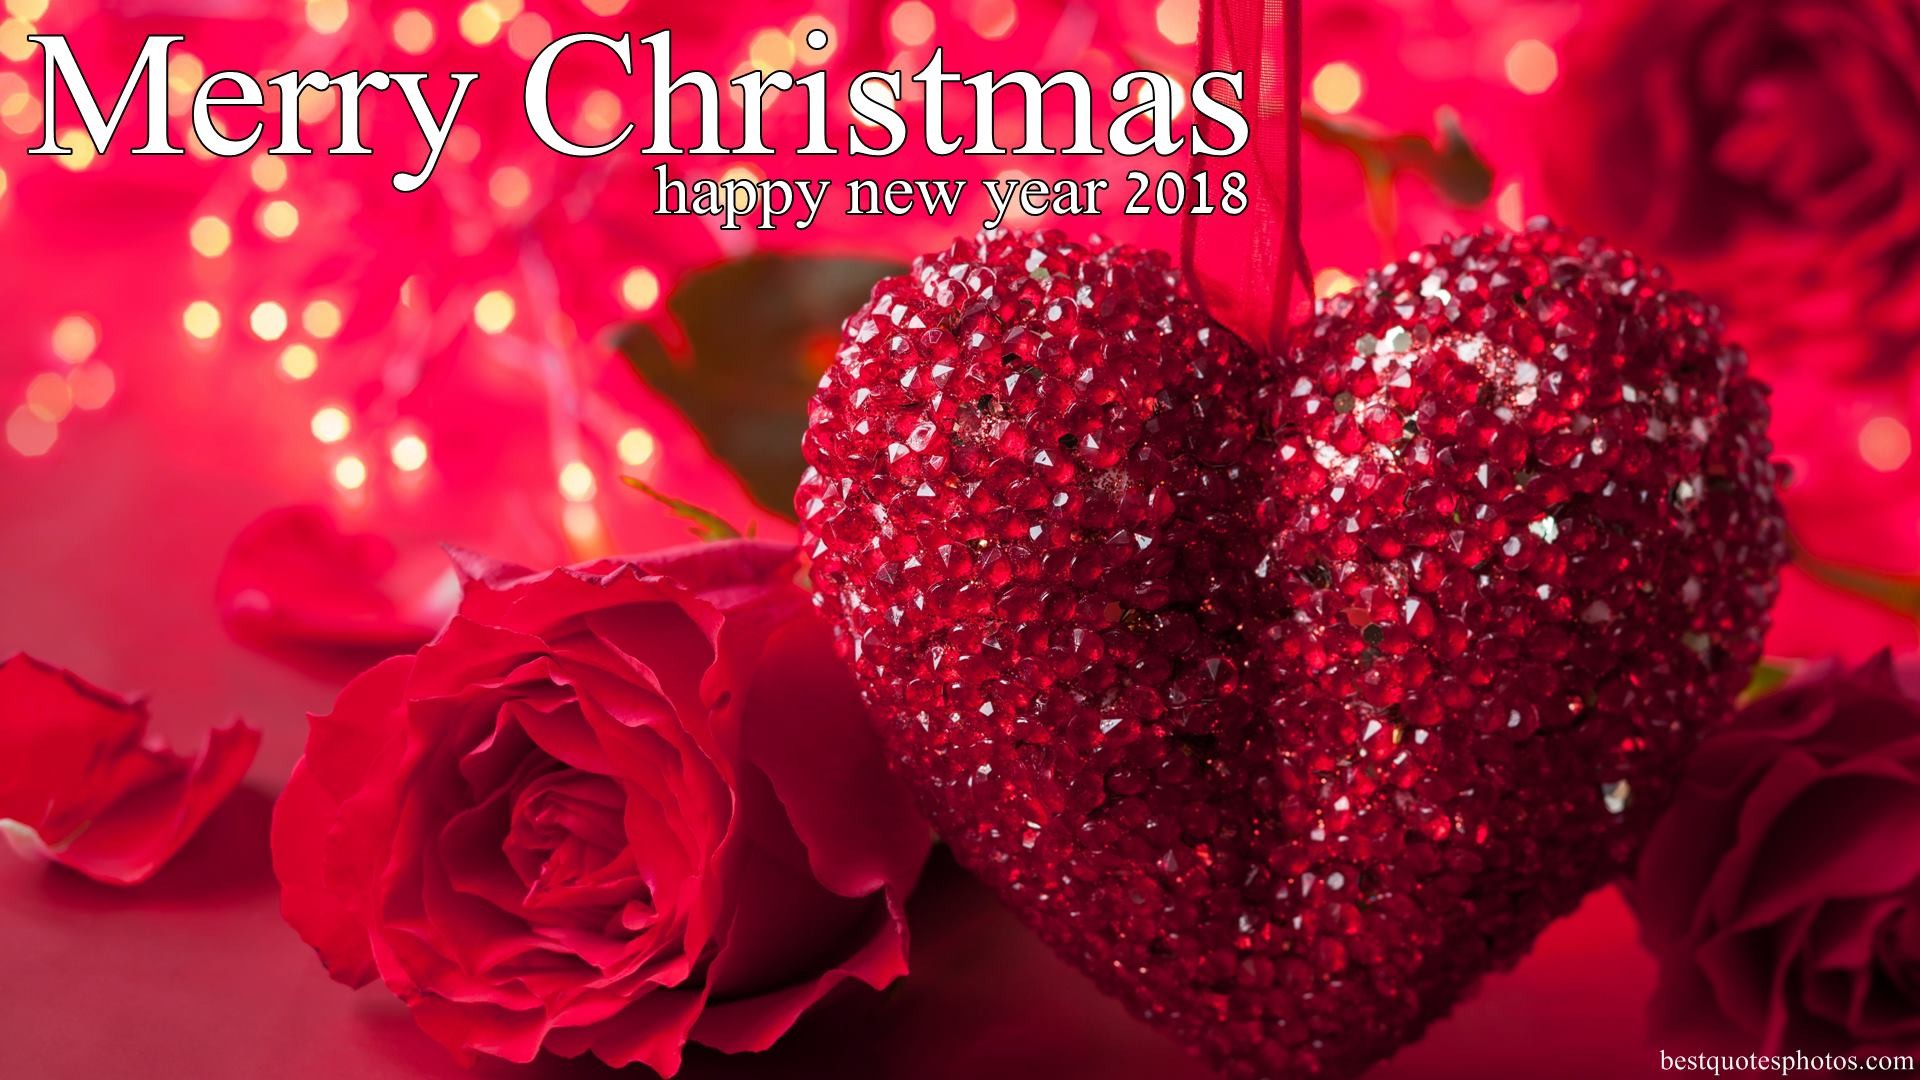 Happy New Year 2018 Merry Christmas Festival Love Hd - Love Photos Download 2018 - HD Wallpaper 